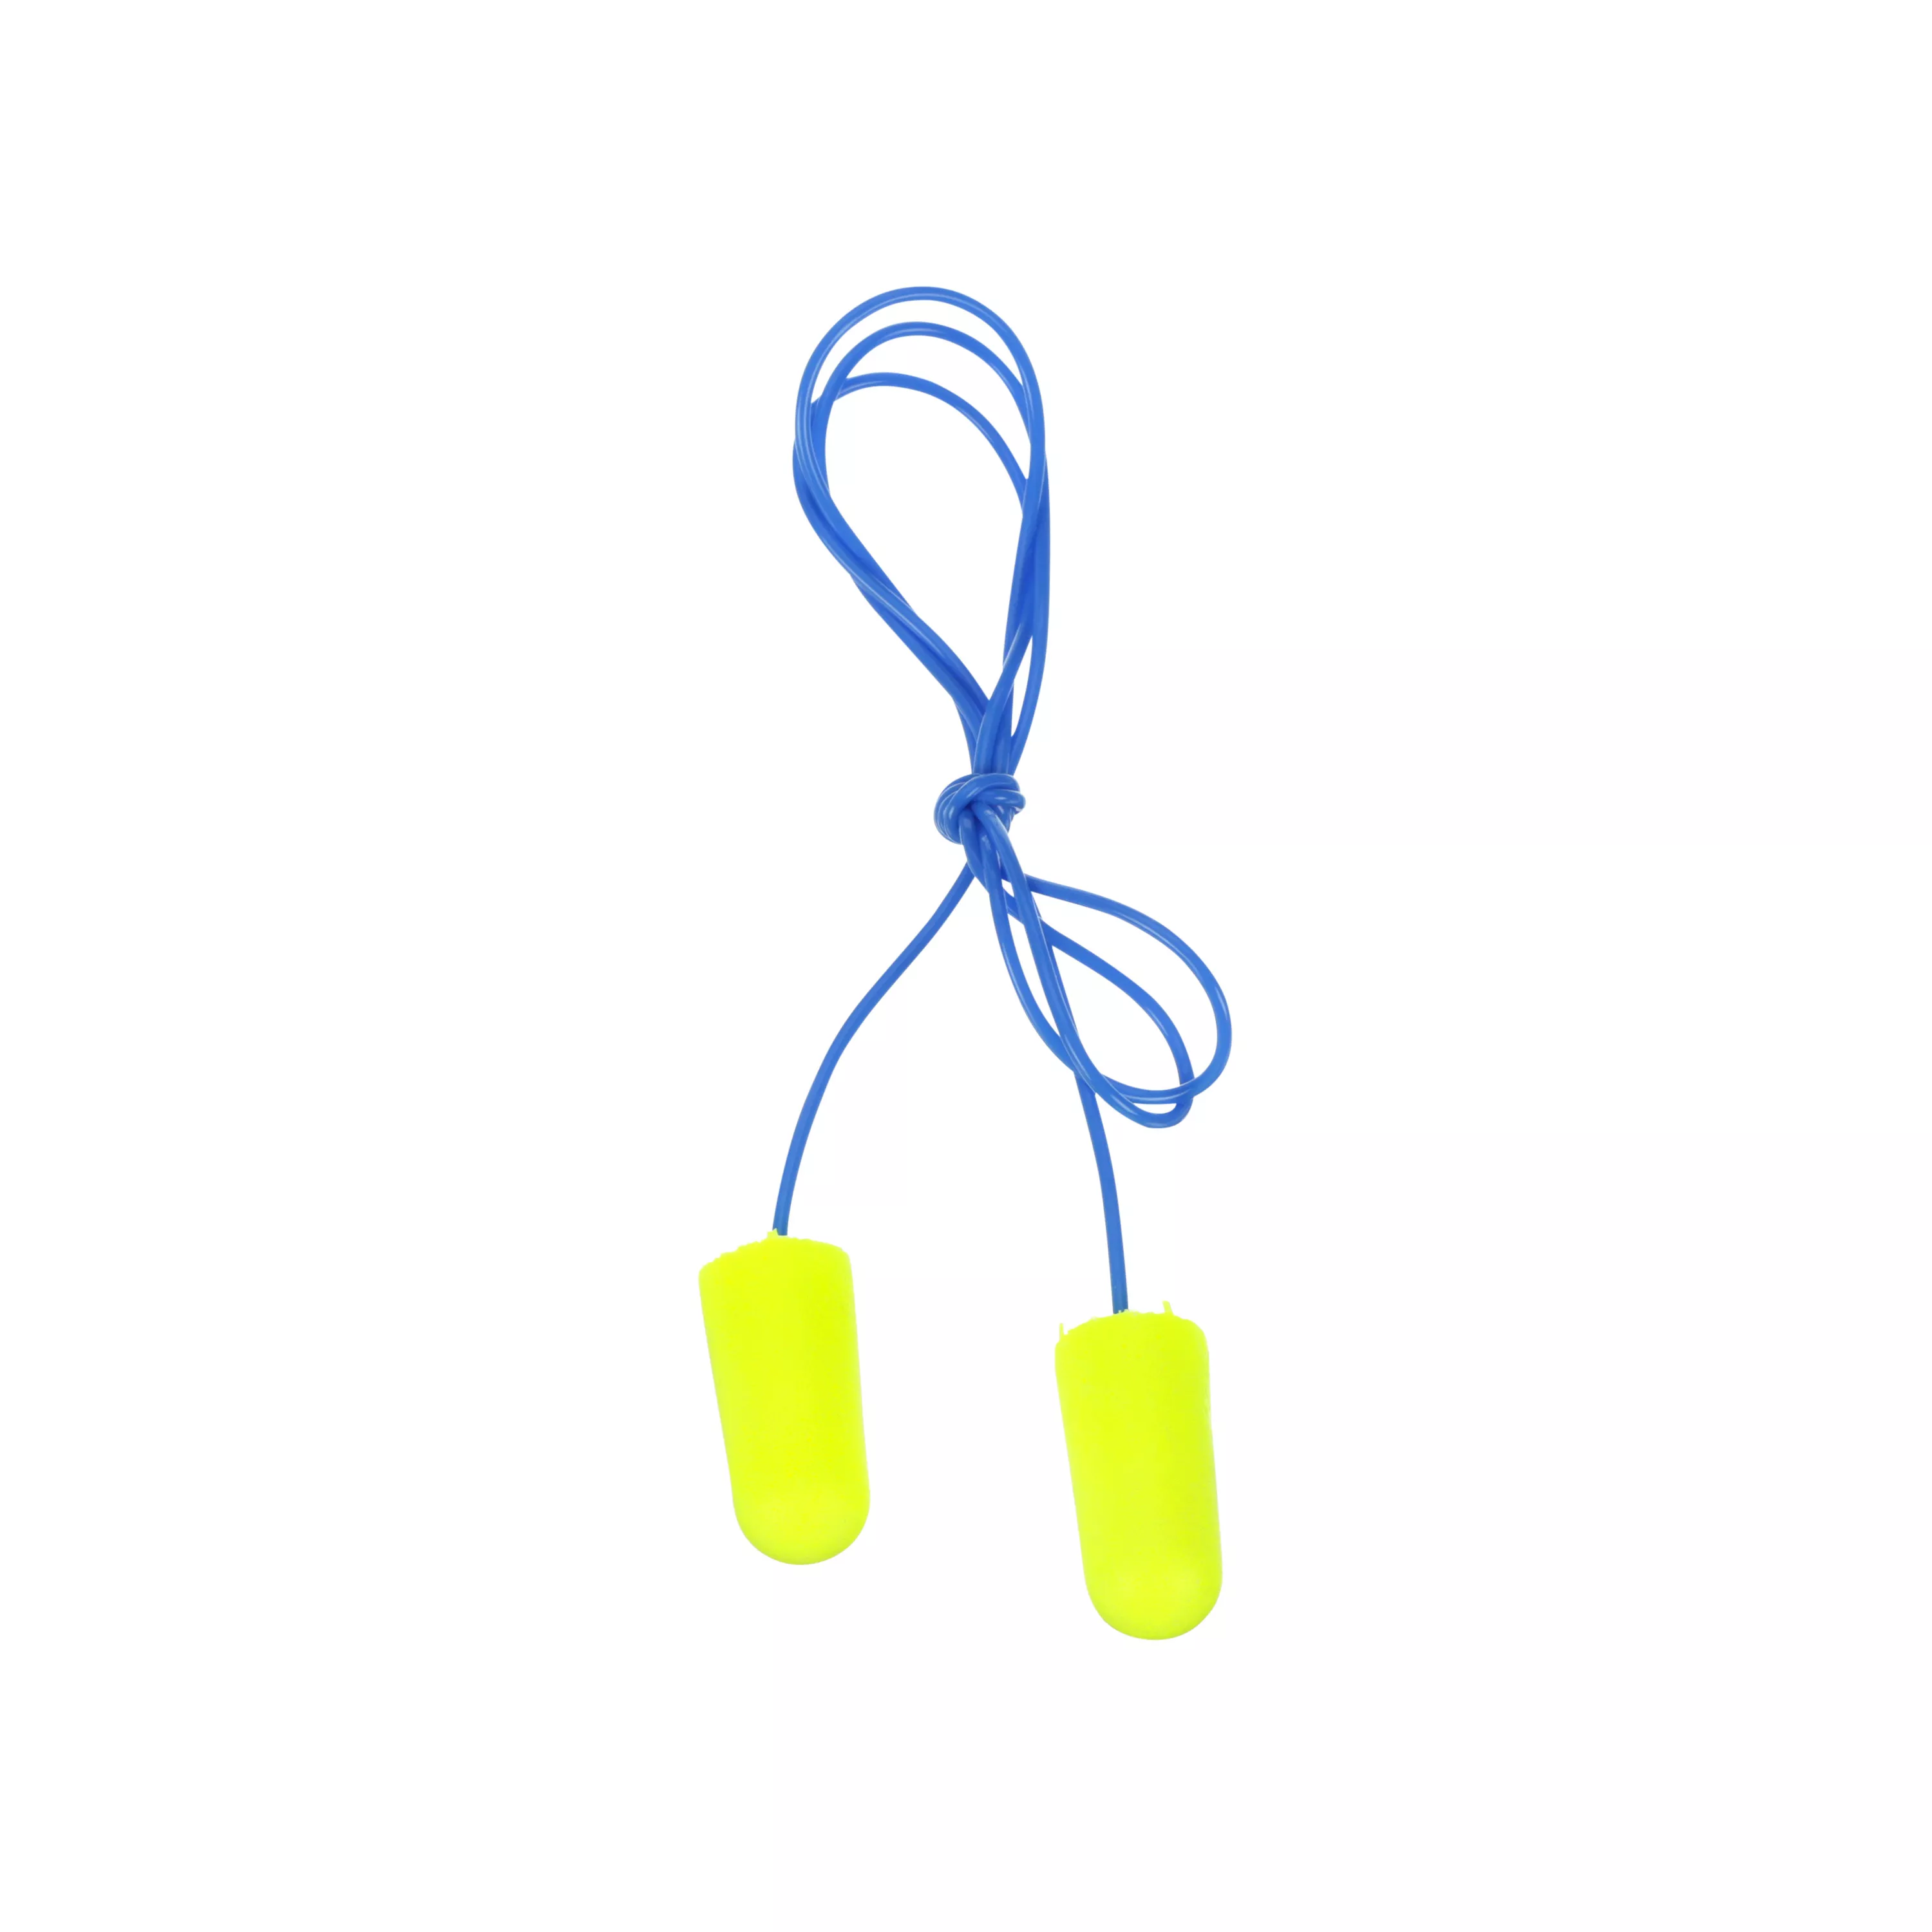 3M™ E-A-Rsoft™ Yellow Neons™ Earplugs 311-1250, Corded, Poly Bag,
Regular Size, 2000 Pair/Case